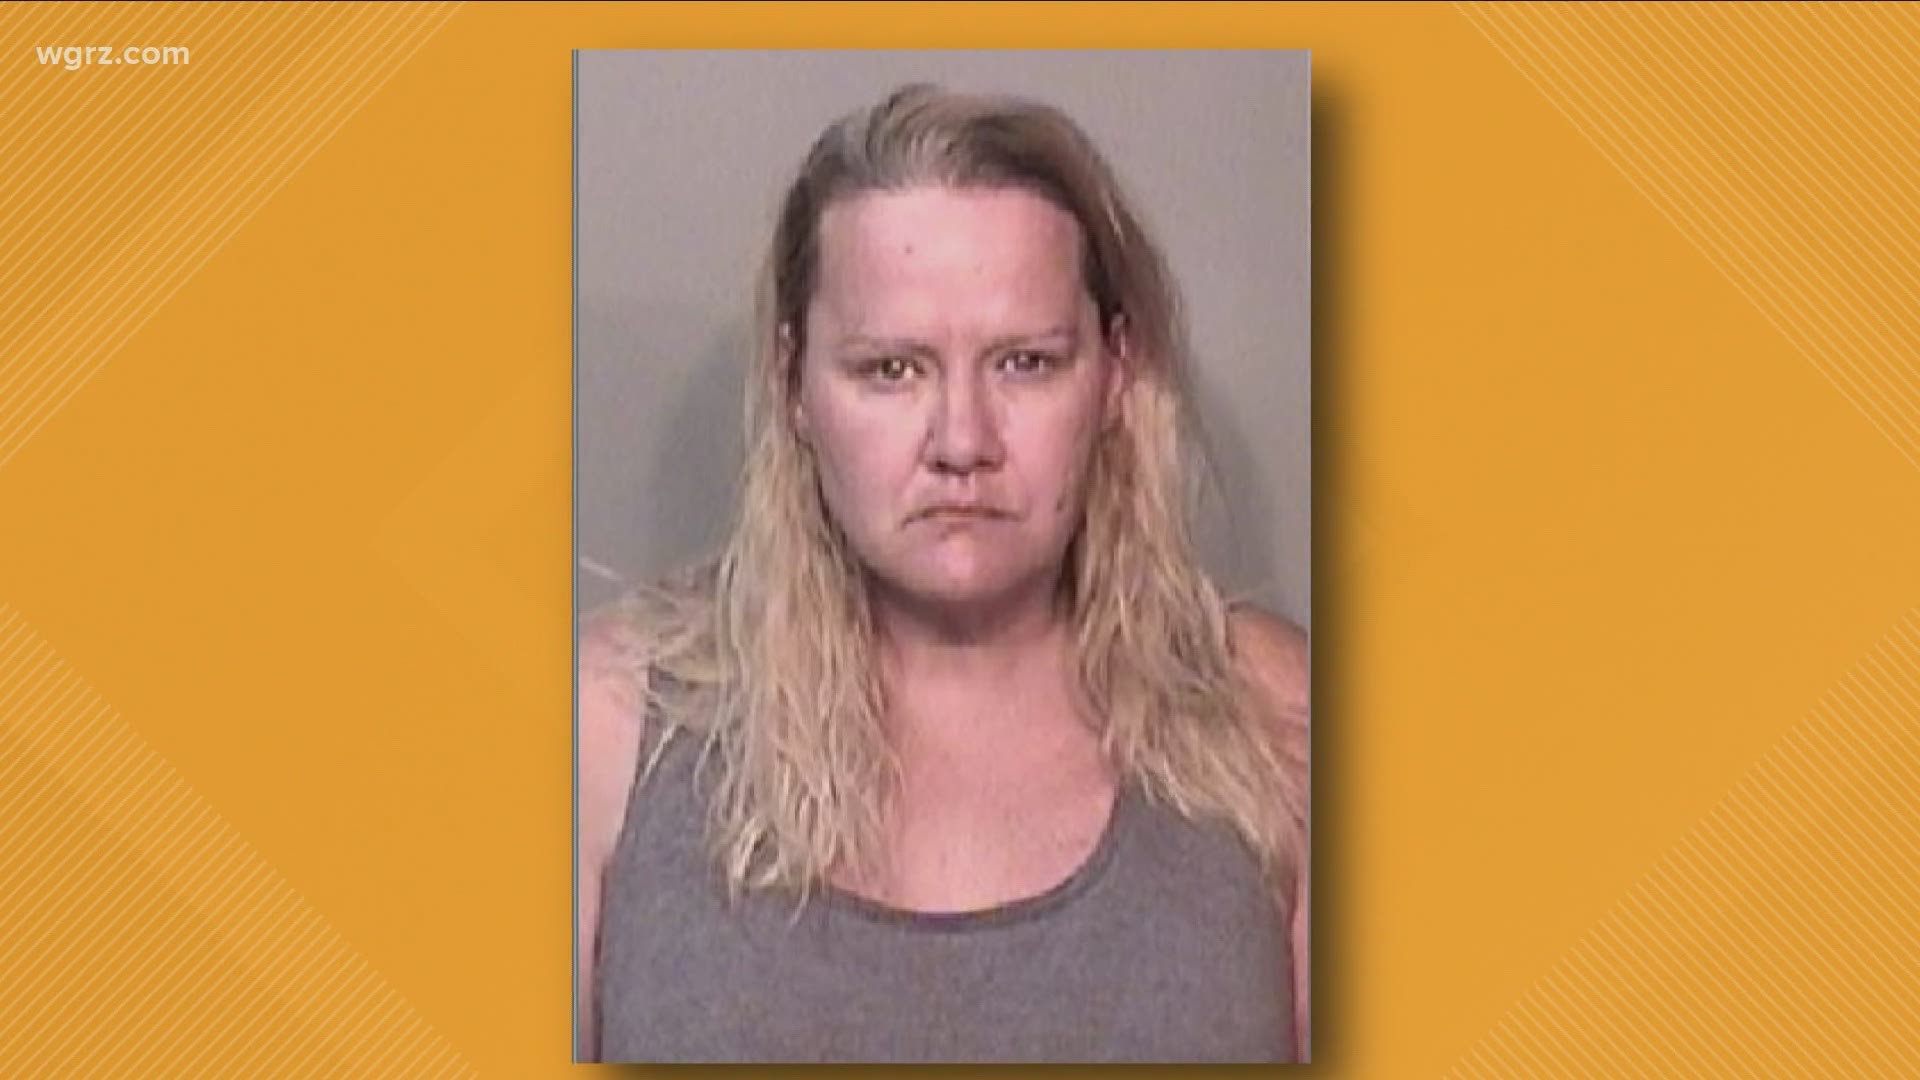 Police say the 45-year-old woman stole several boxes of Suboxone, a drug that is commonly used to treat people with opioid addictions.